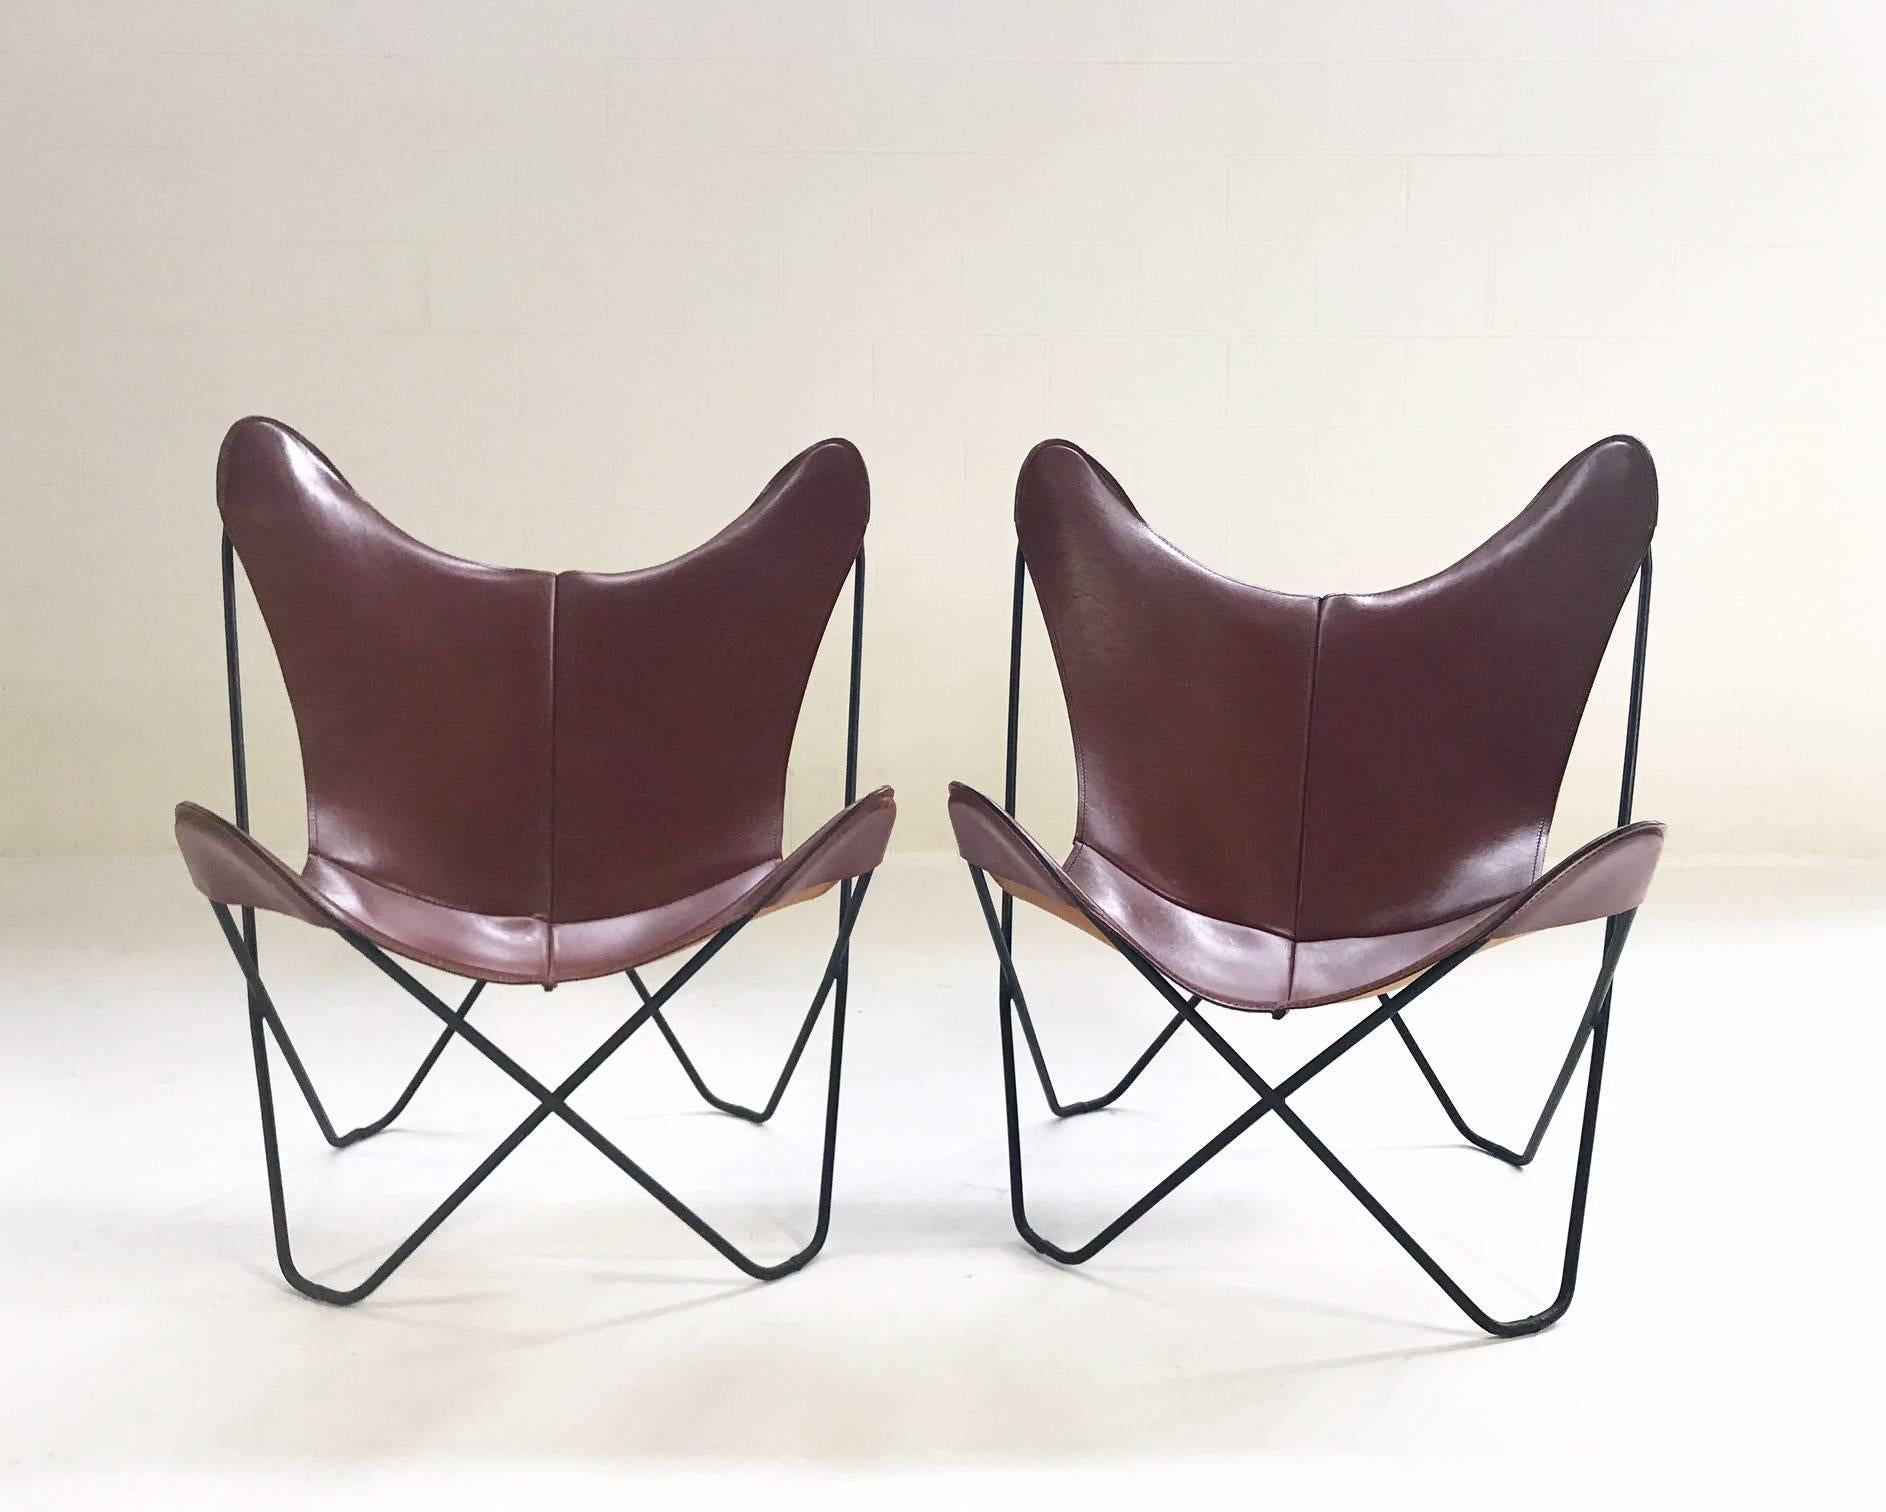 The classic Butterfly chair! We wanted to keep this vintage pair as is since the leather still looks so good! There are some minor scratches to the leather consistent with age and use but overall this pair is in fine vintage condition. There is